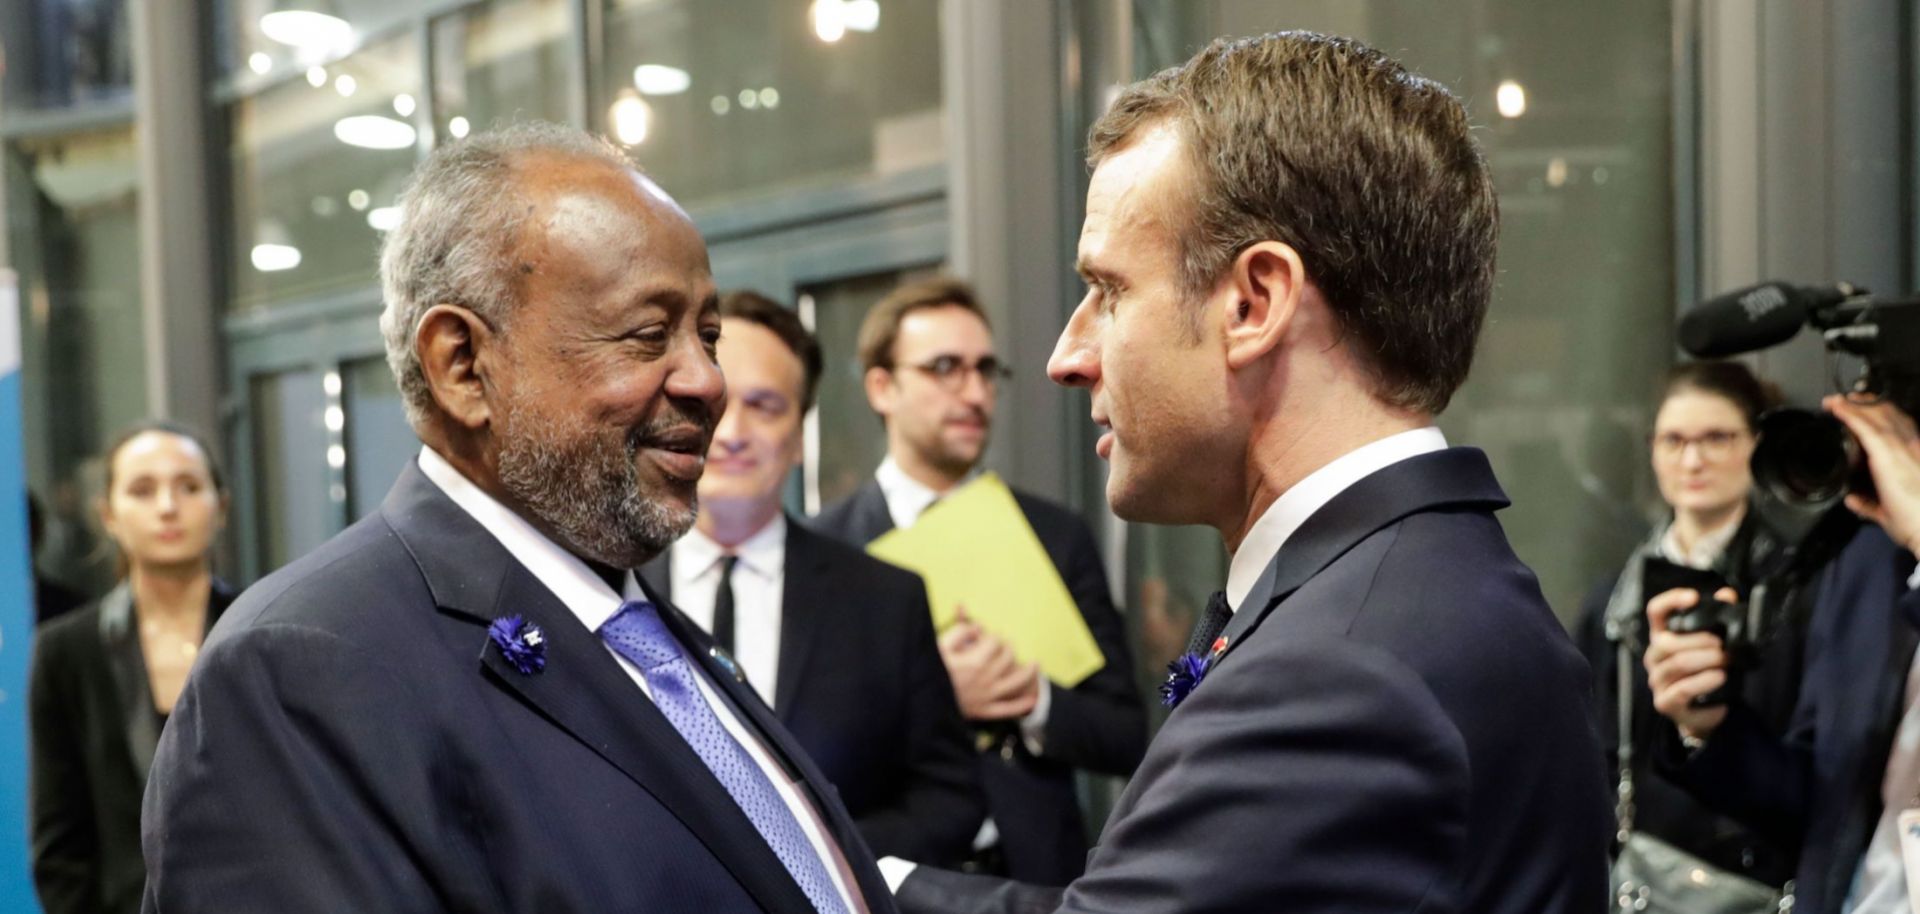 Djibouti's President Ismail Omar Guelleh and French President Emmanuel Macron during the Paris Peace Forum in November 2018